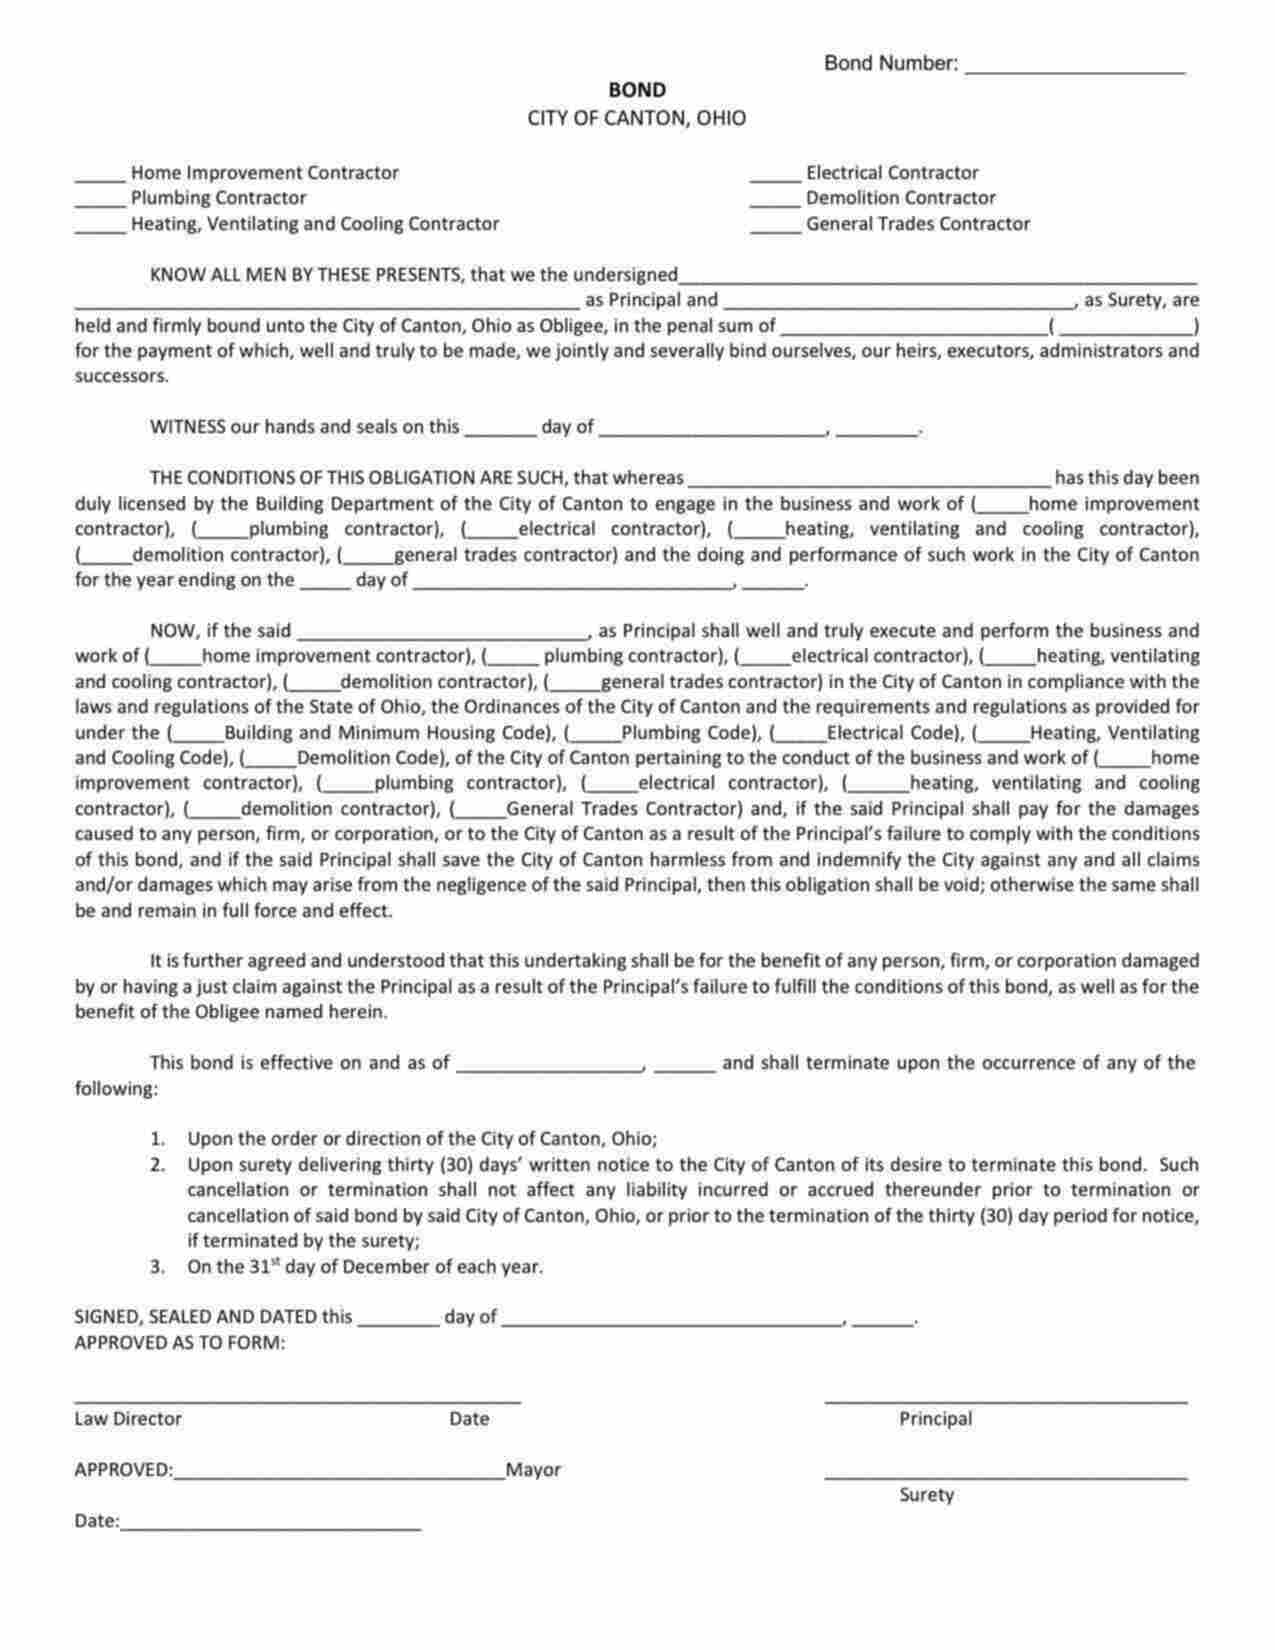 Ohio Heating, Ventilating and Cooling (HVAC) Contractor Bond Form